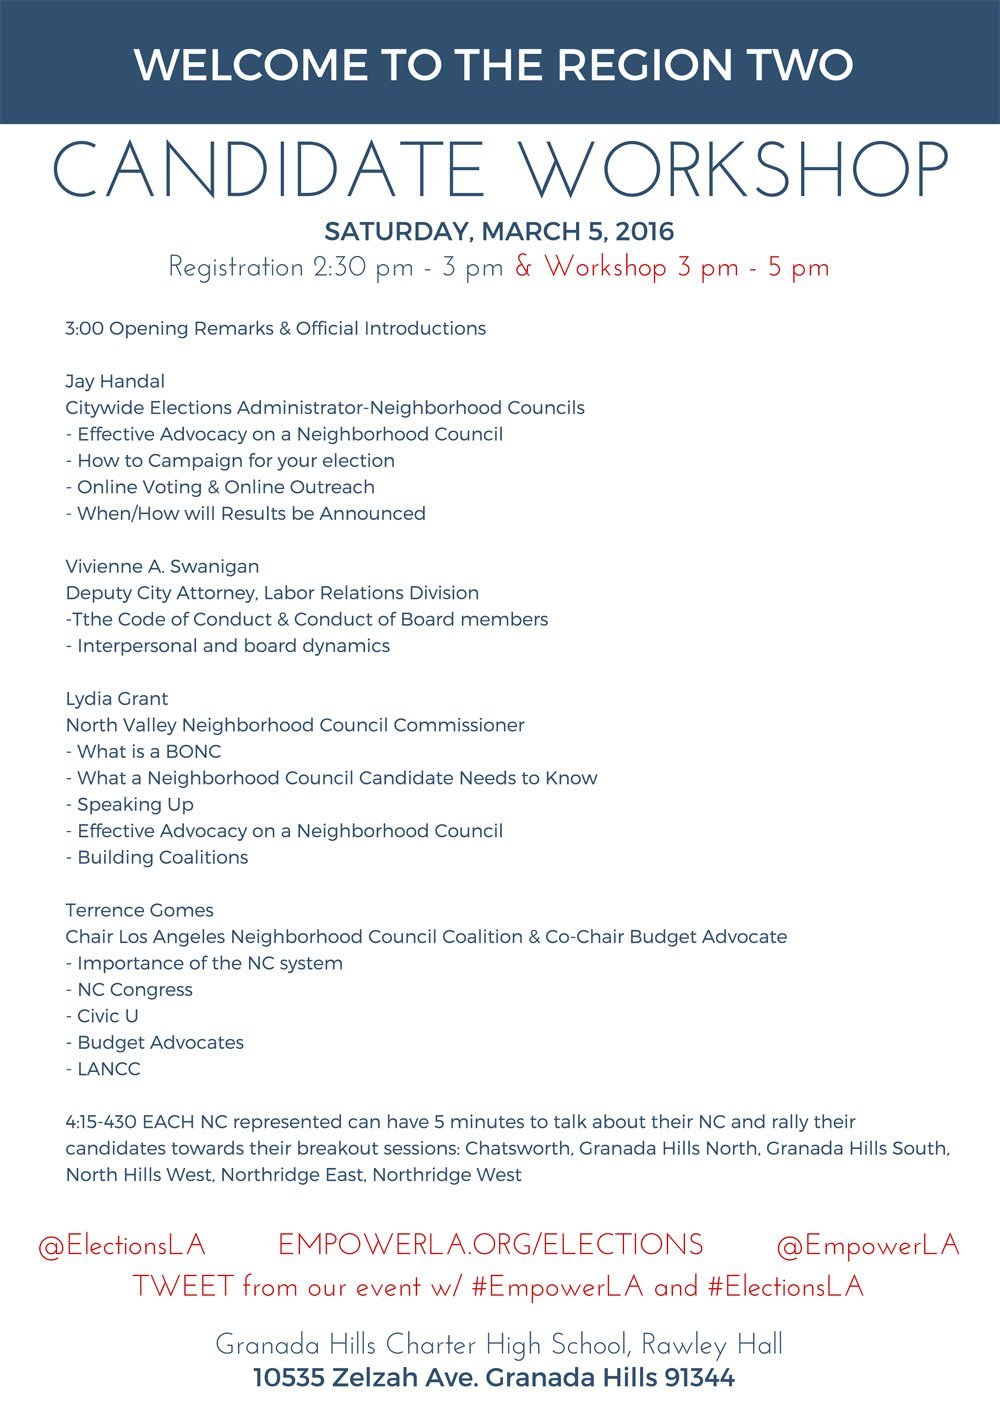 Region Two Election Candidate Workshop – Saturday, March 5